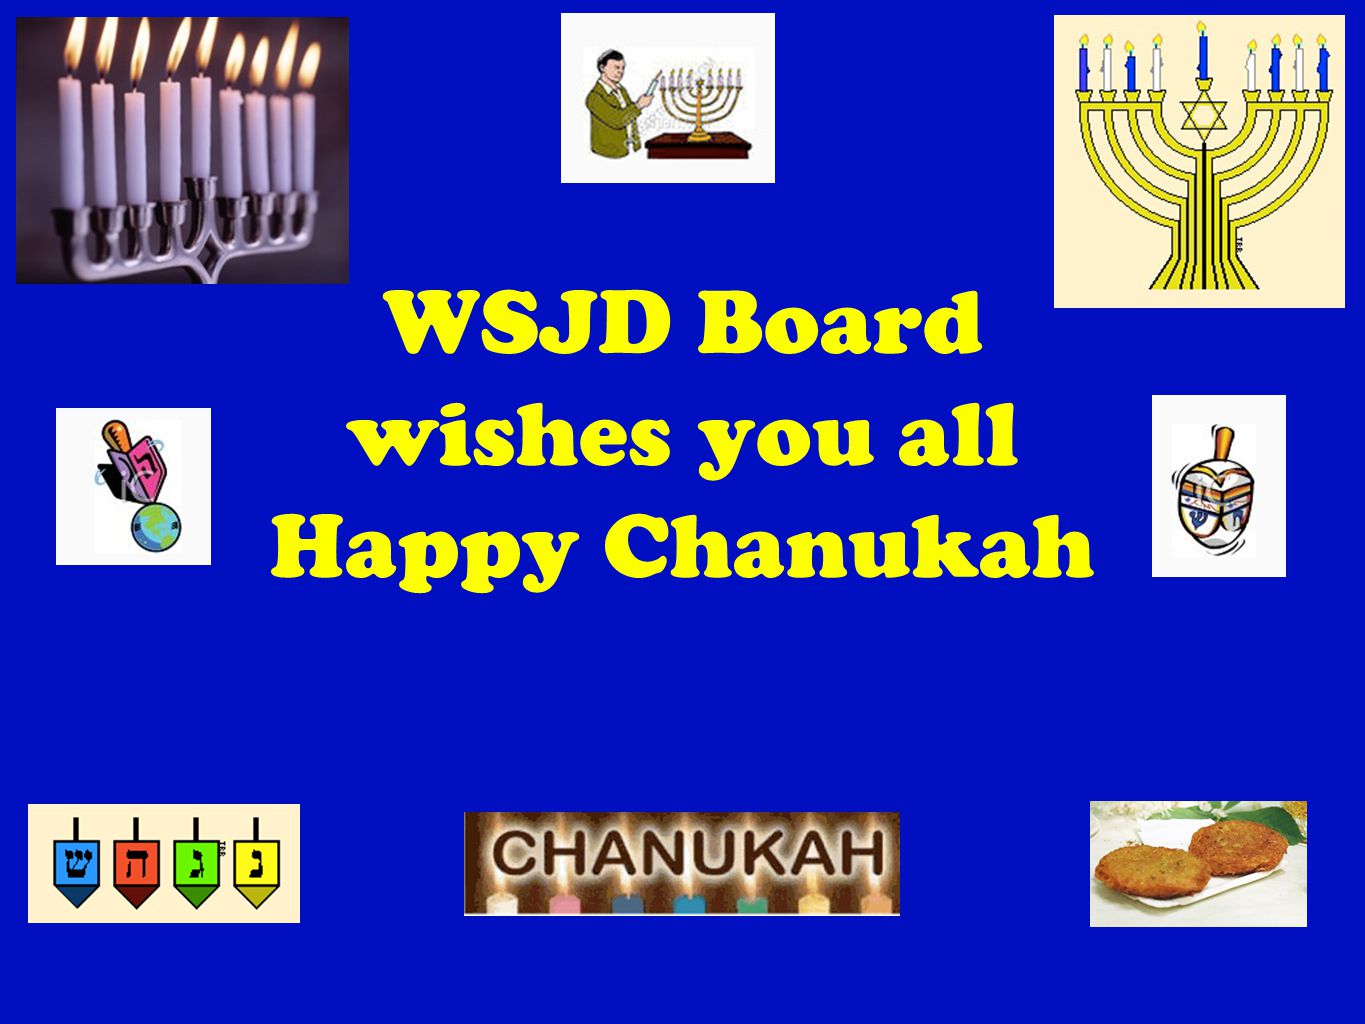 WSJD Board wishes you all Happy Chanukah